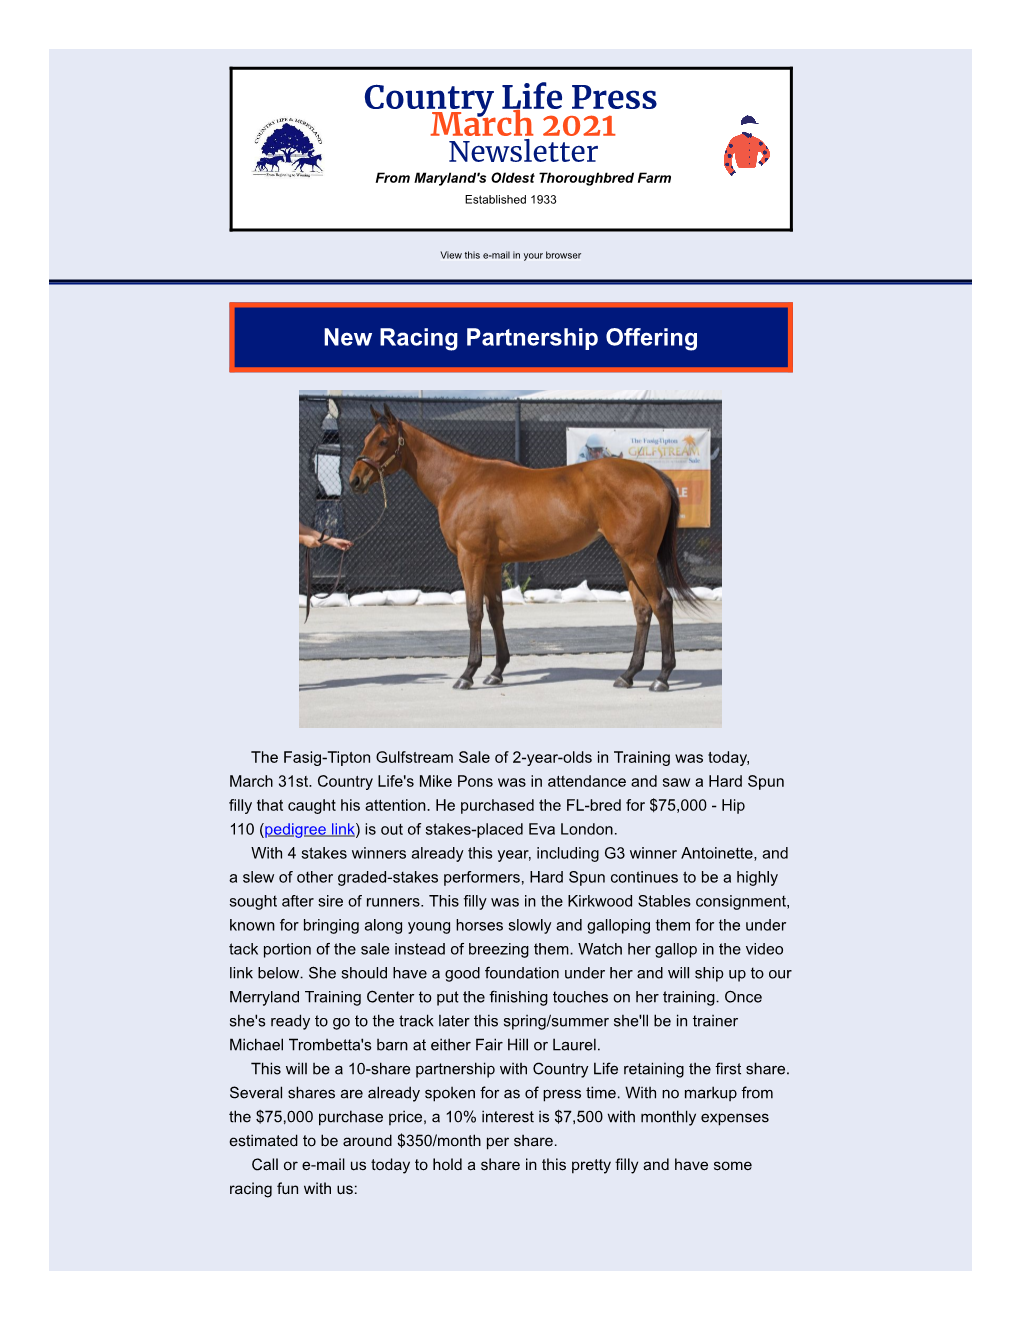 Country Life Press March 2021 Newsletter from Maryland's Oldest Thoroughbred Farm Established 1933